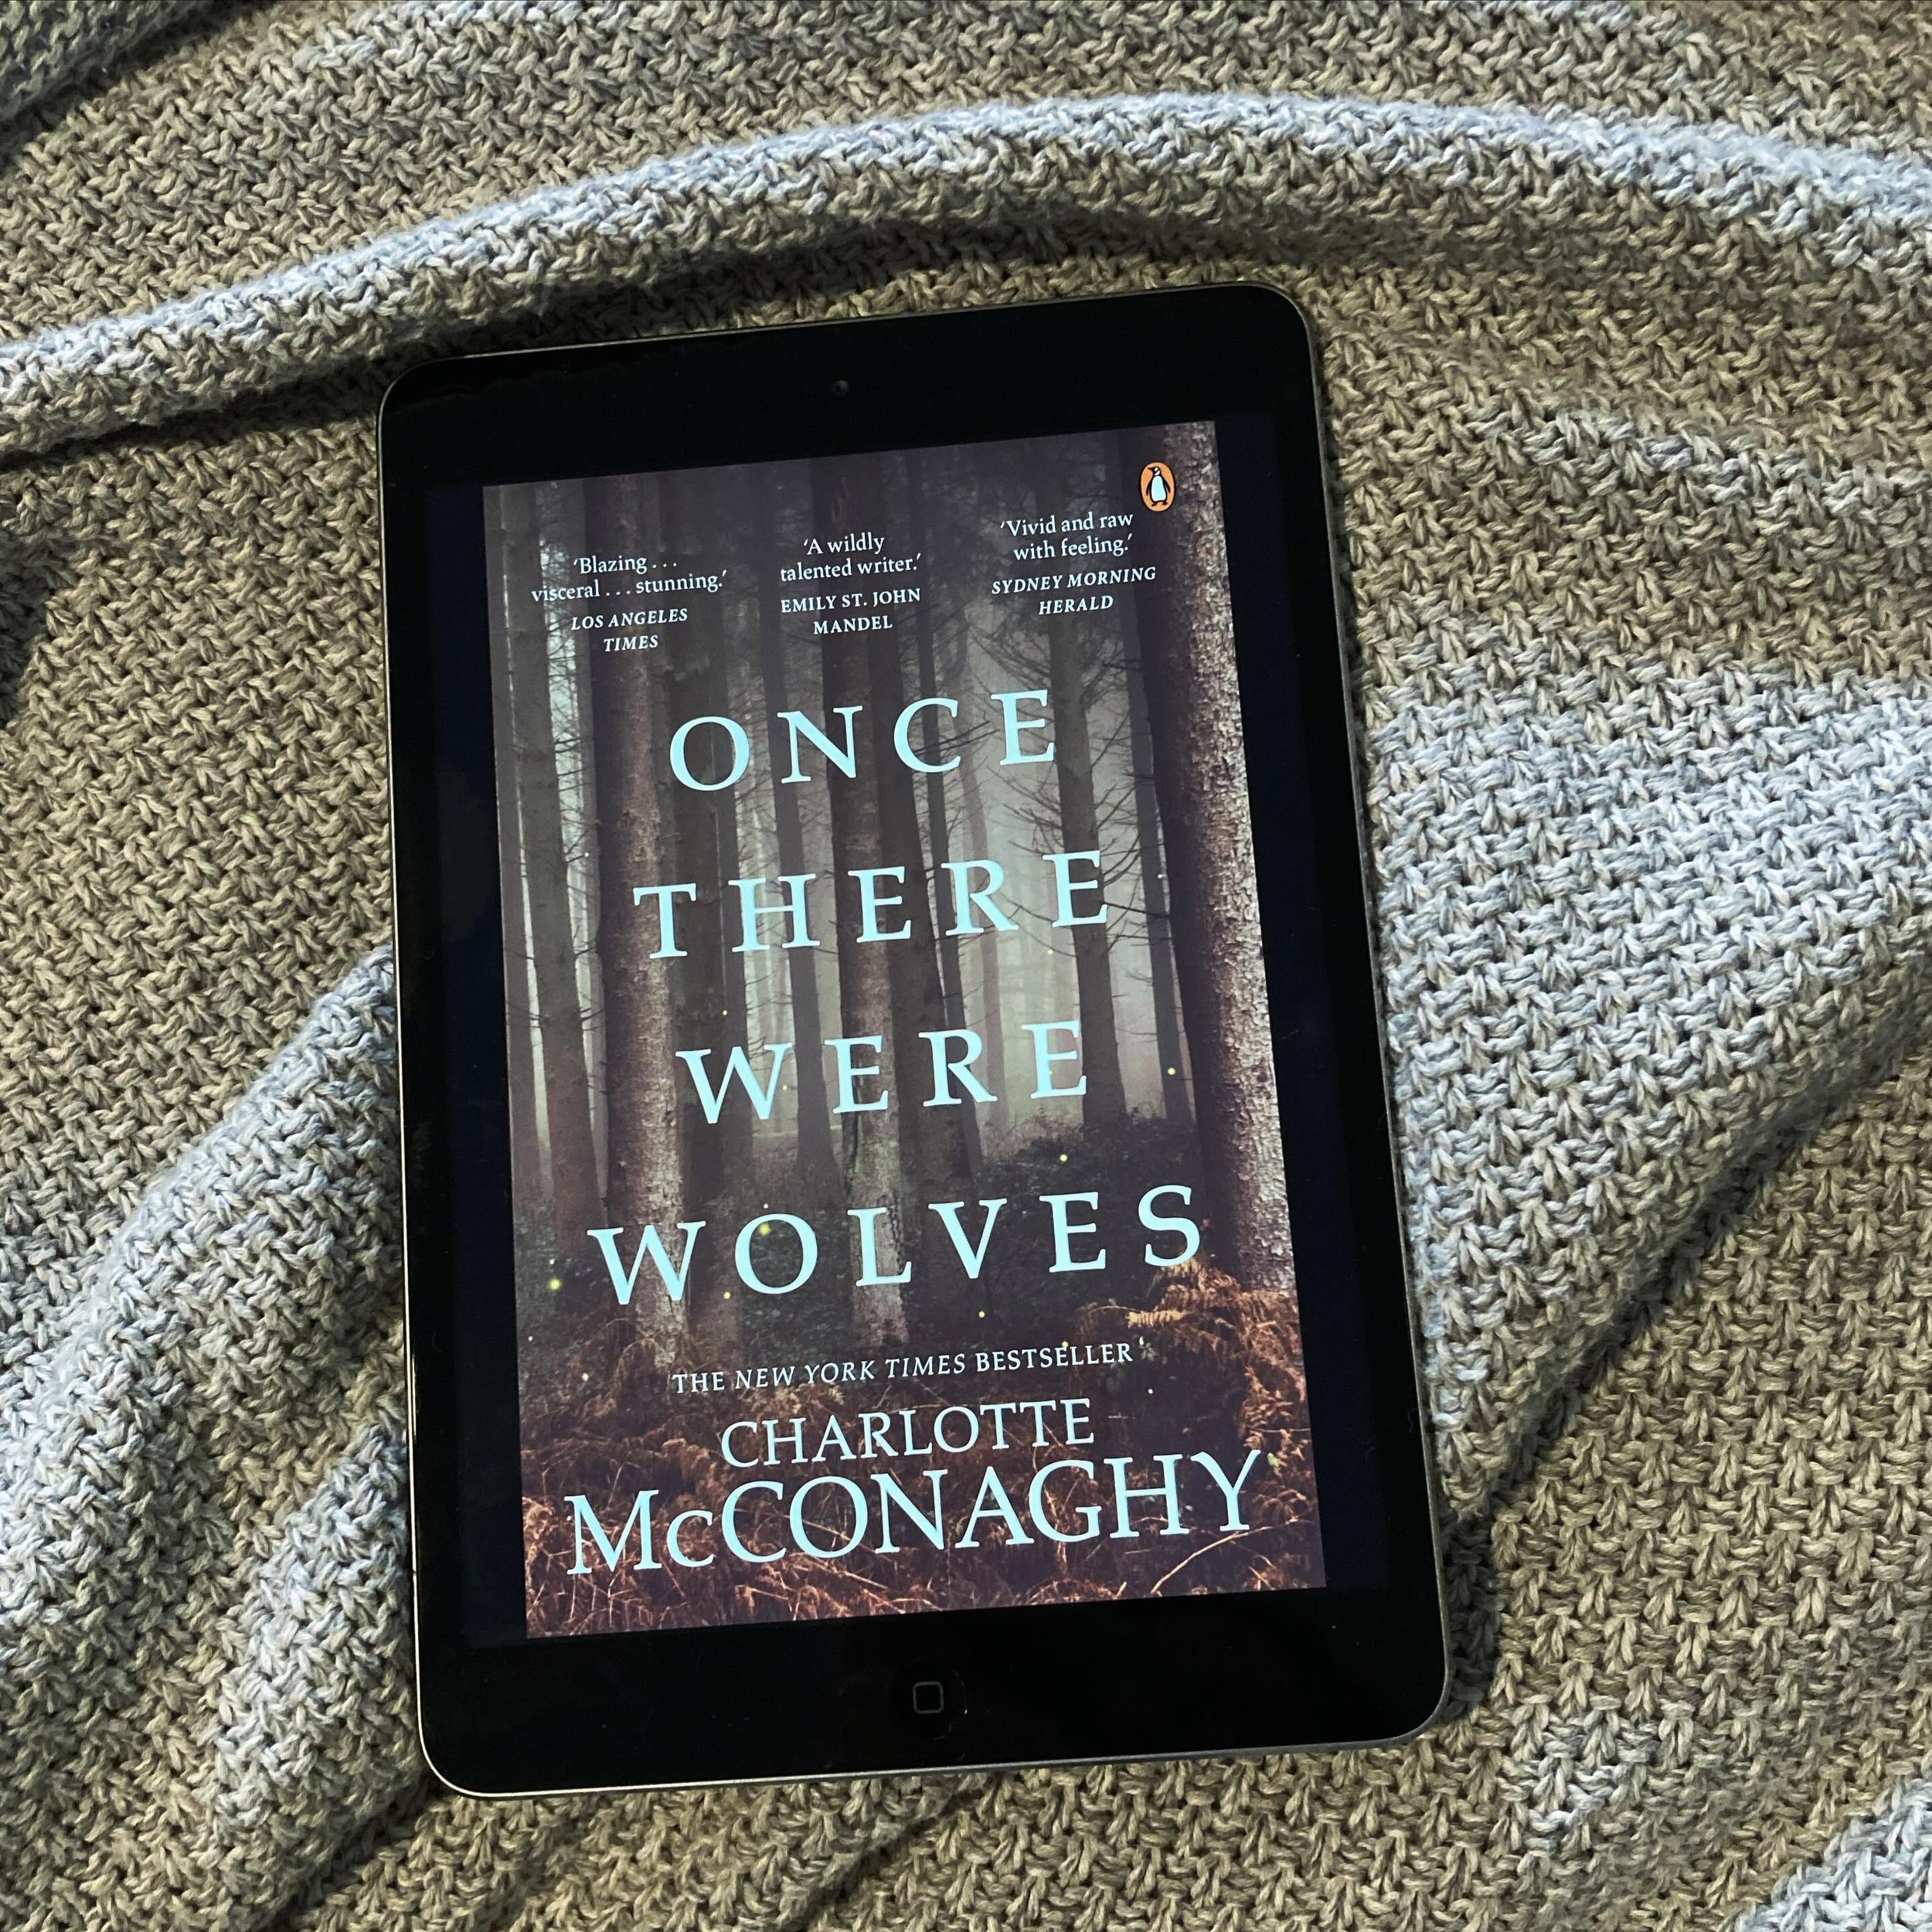 Once There Were Wolves by @charlottemcconaghy 

The atmosphere in this book was incredible. I loved the remote Scottish setting (outlander vibes) and the return of the wolves and the clash with the locals. I thought I knew where a couple of storyline